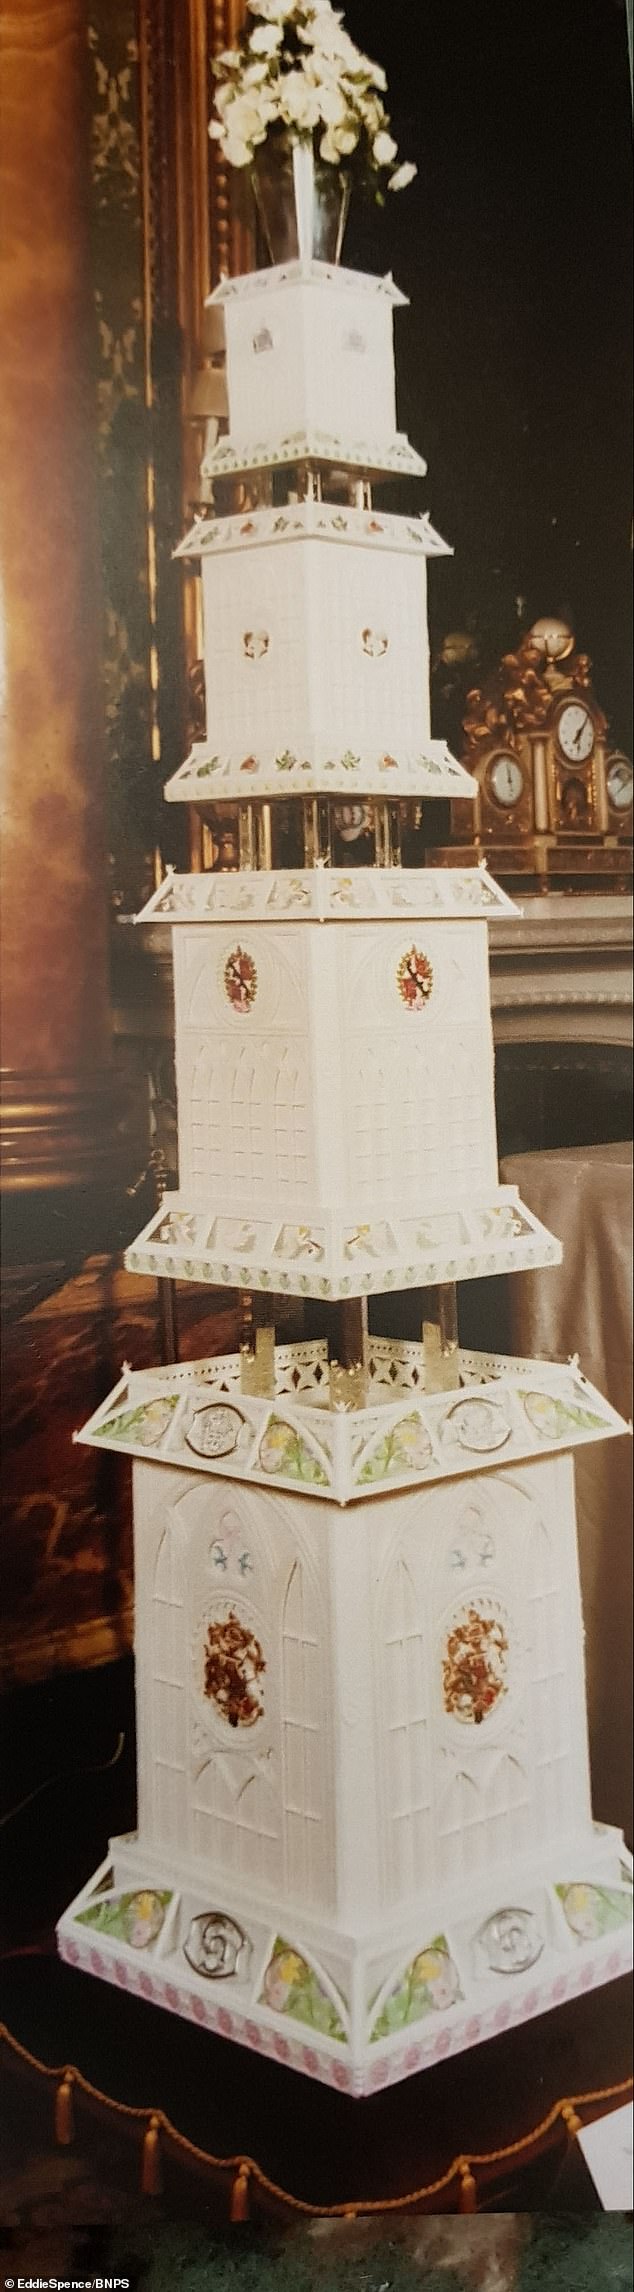 Charles and Diana's wedding cake by the royal cake maker Eddie Spence